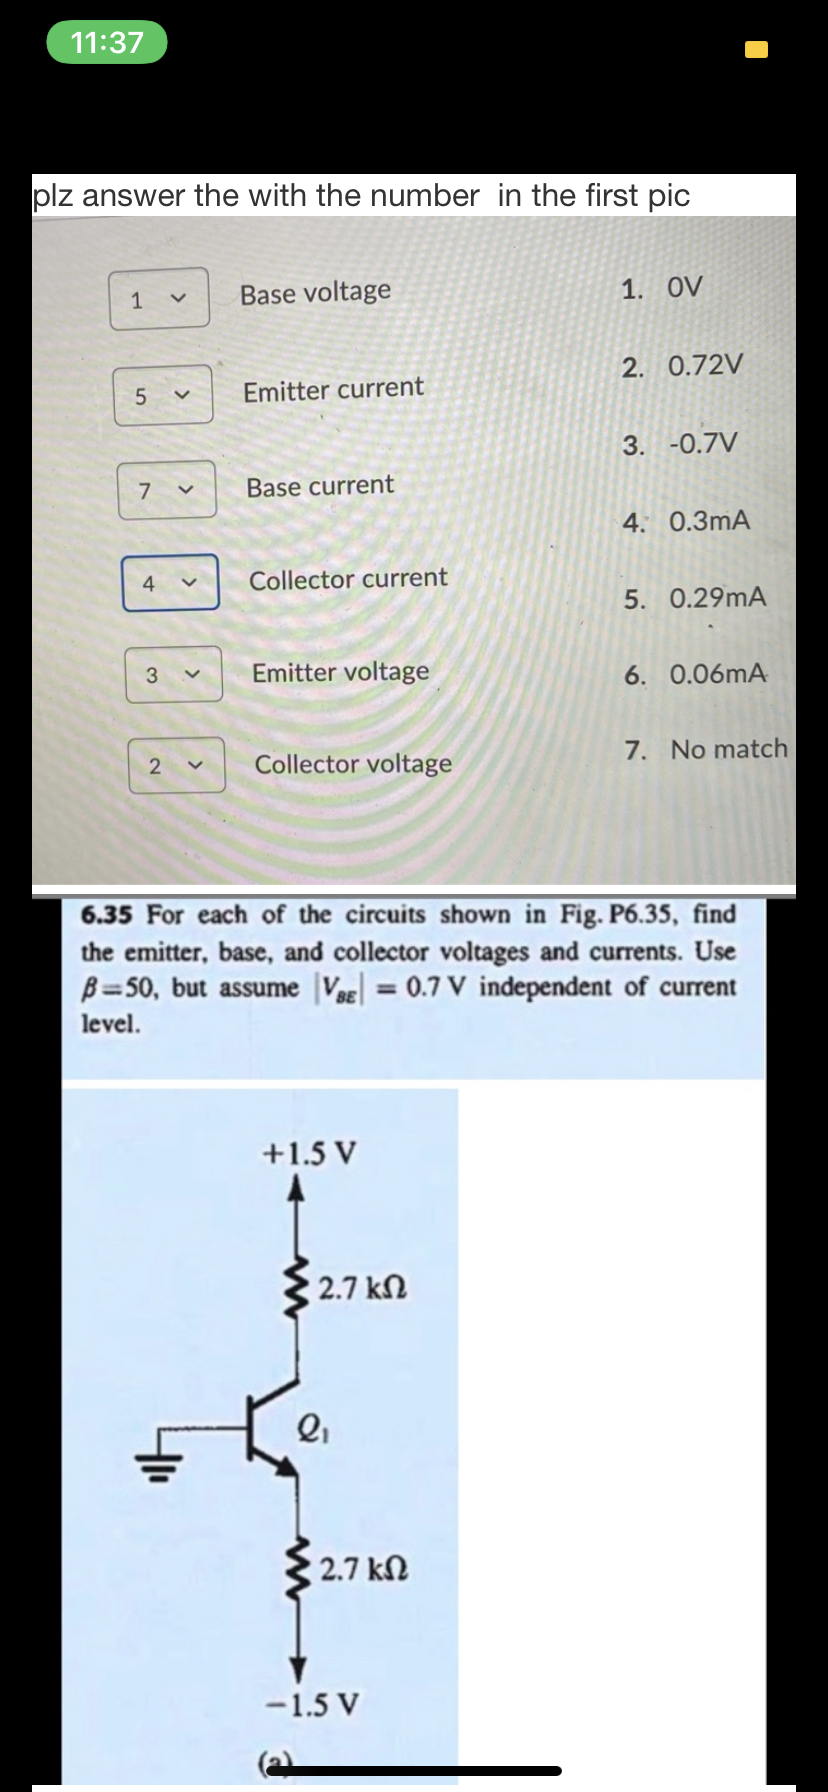 11:37
plz answer the with the number in the first pic
Base voltage
1. OV
2. 0.72V
Emitter current
3. -0.7V
Base current
4. 0.3mA
4
Collector current
5. 0.29mA
3
Emitter voltage
6. 0.06mA
7. No match
Collector voltage
6.35 For each of the circuits shown in Fig. P6.35, find
the emitter, base, and collector voltages and currents. Use
B=50, but assume VBE=0.7 V independent of current
%3D
level.
+1.5 V
2.7 kN
2.7 kN
-1.5 V
>
